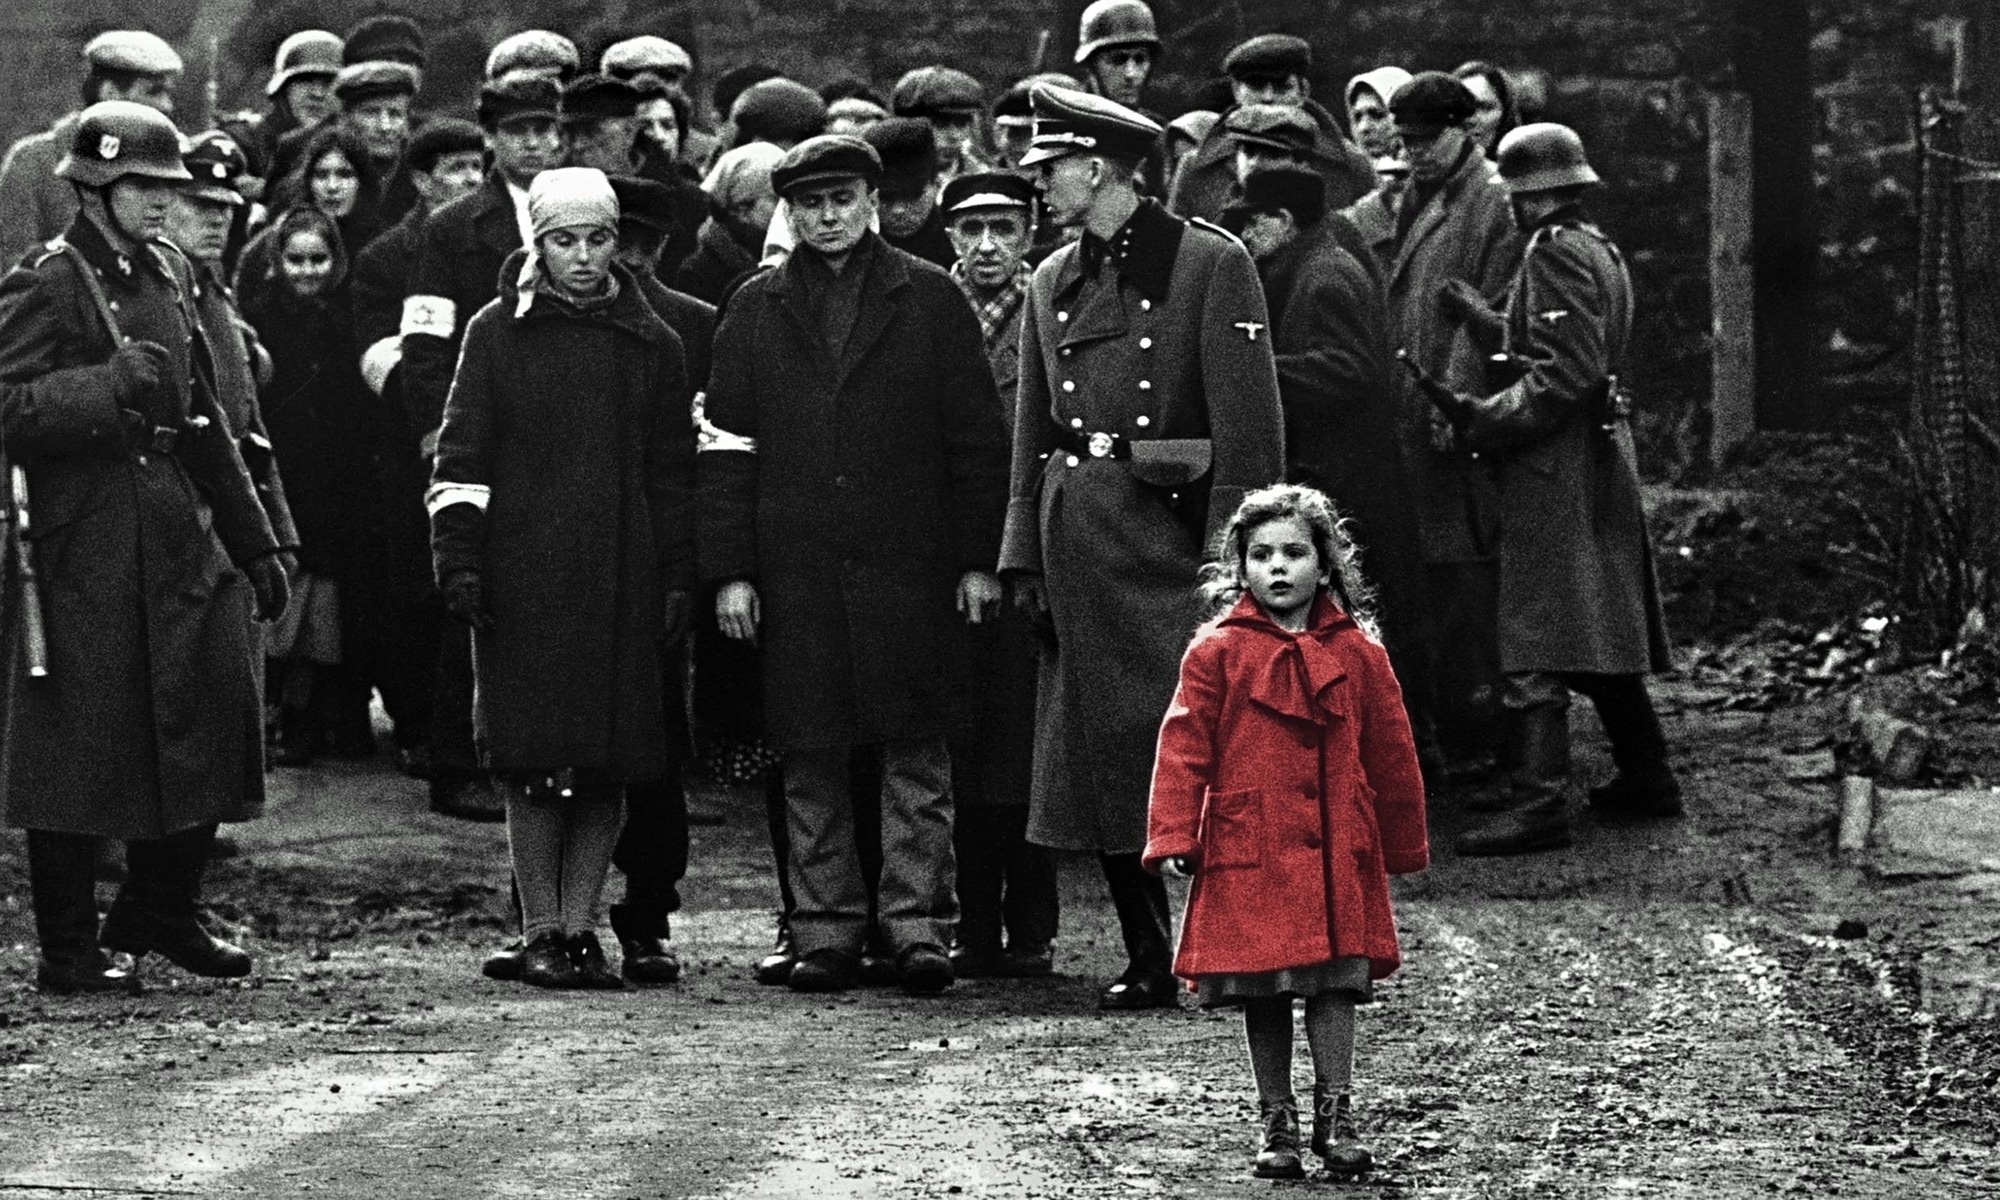 Steven Spielberg held on to the story of Schindler's List for ten years before making the movie. When he received it, he didn't think that he was mature enough to make it.